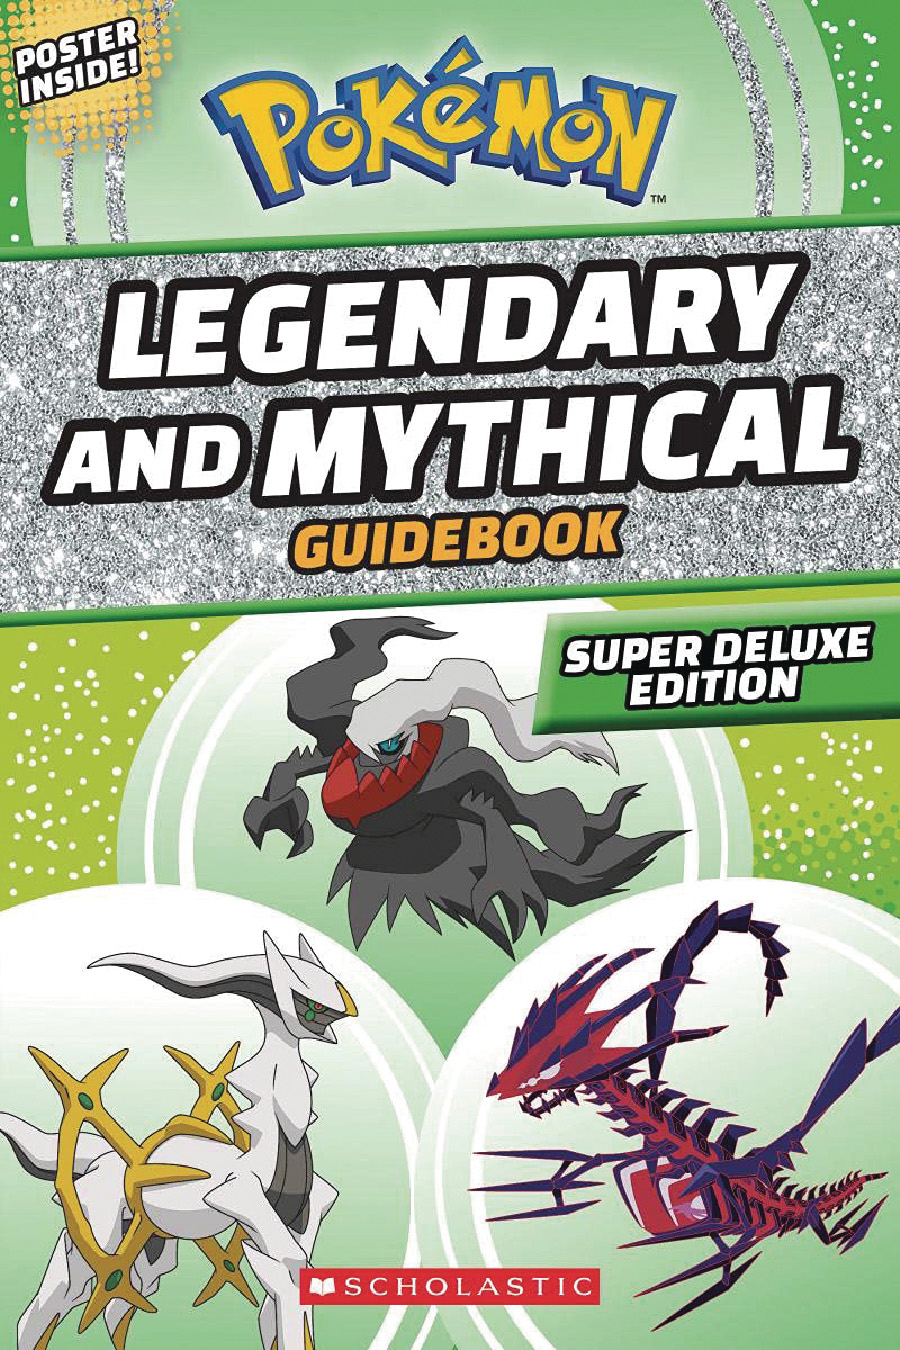 Pokemon Legendary And Mythical Guidebook Super Deluxe Edition TP